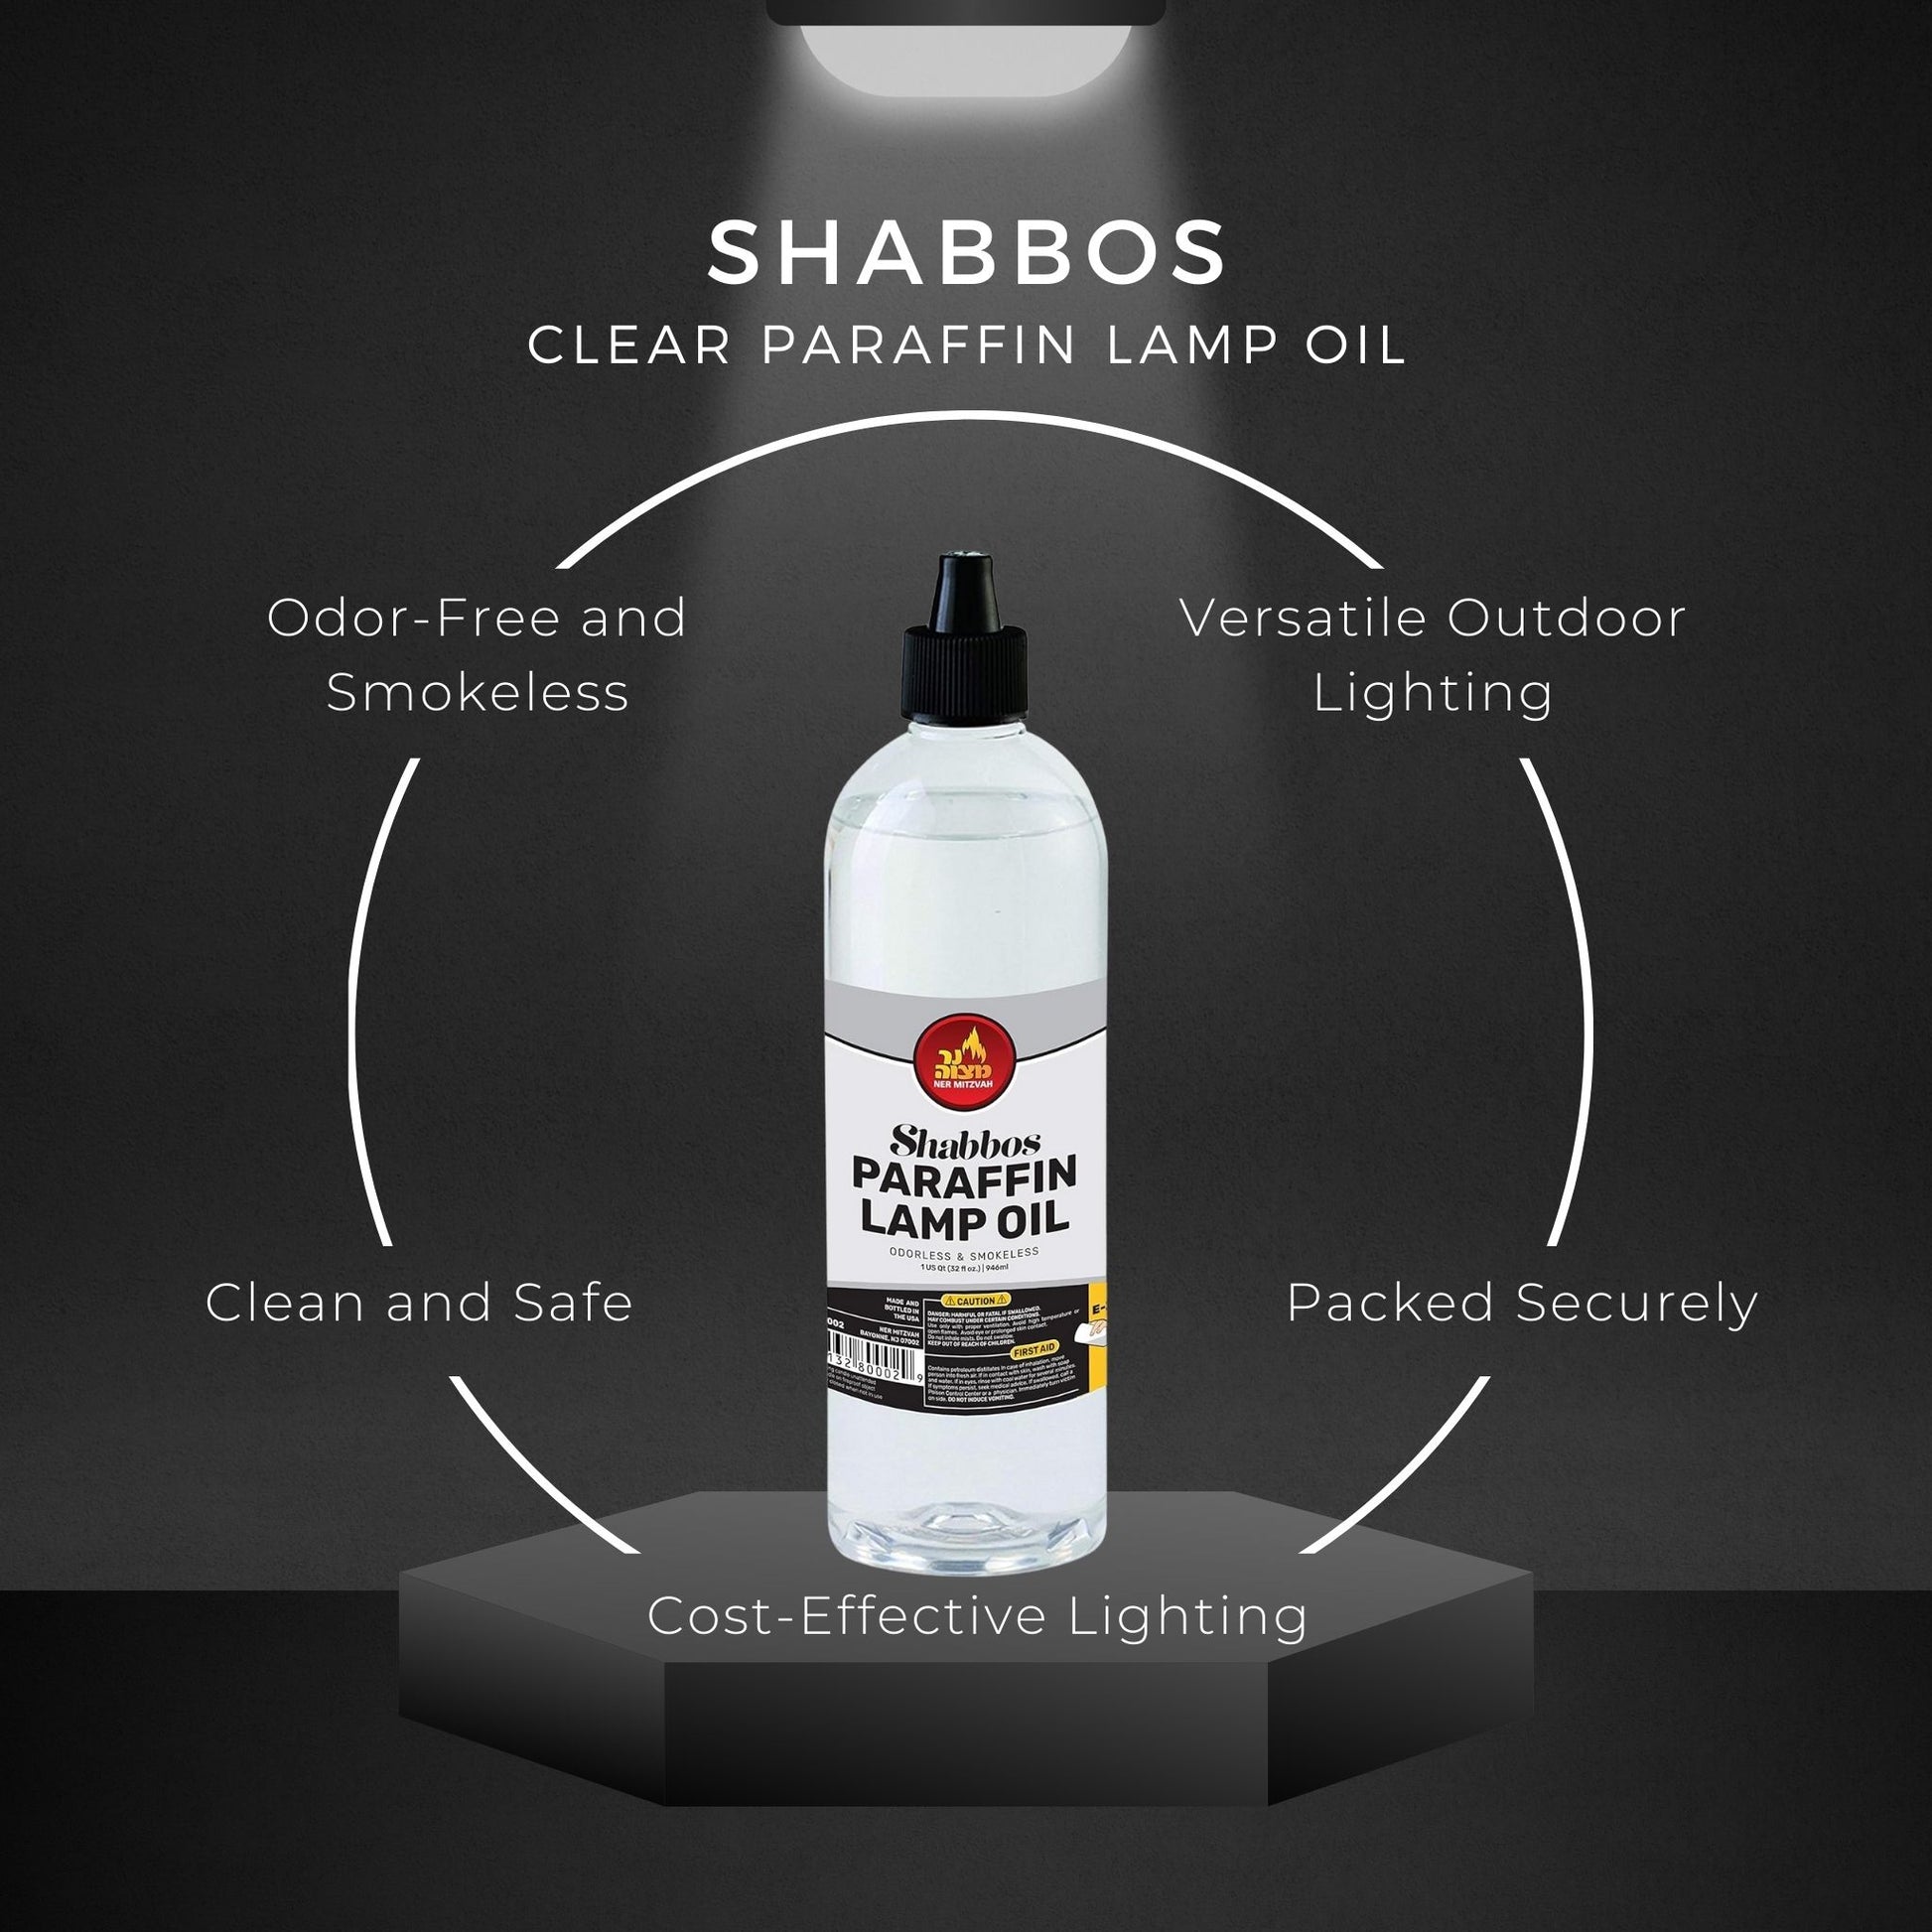 Shabbos Paraffin Lamp Oil - 32 fl oz  Clean-Burning, Smokeless, and O –  Candyhill